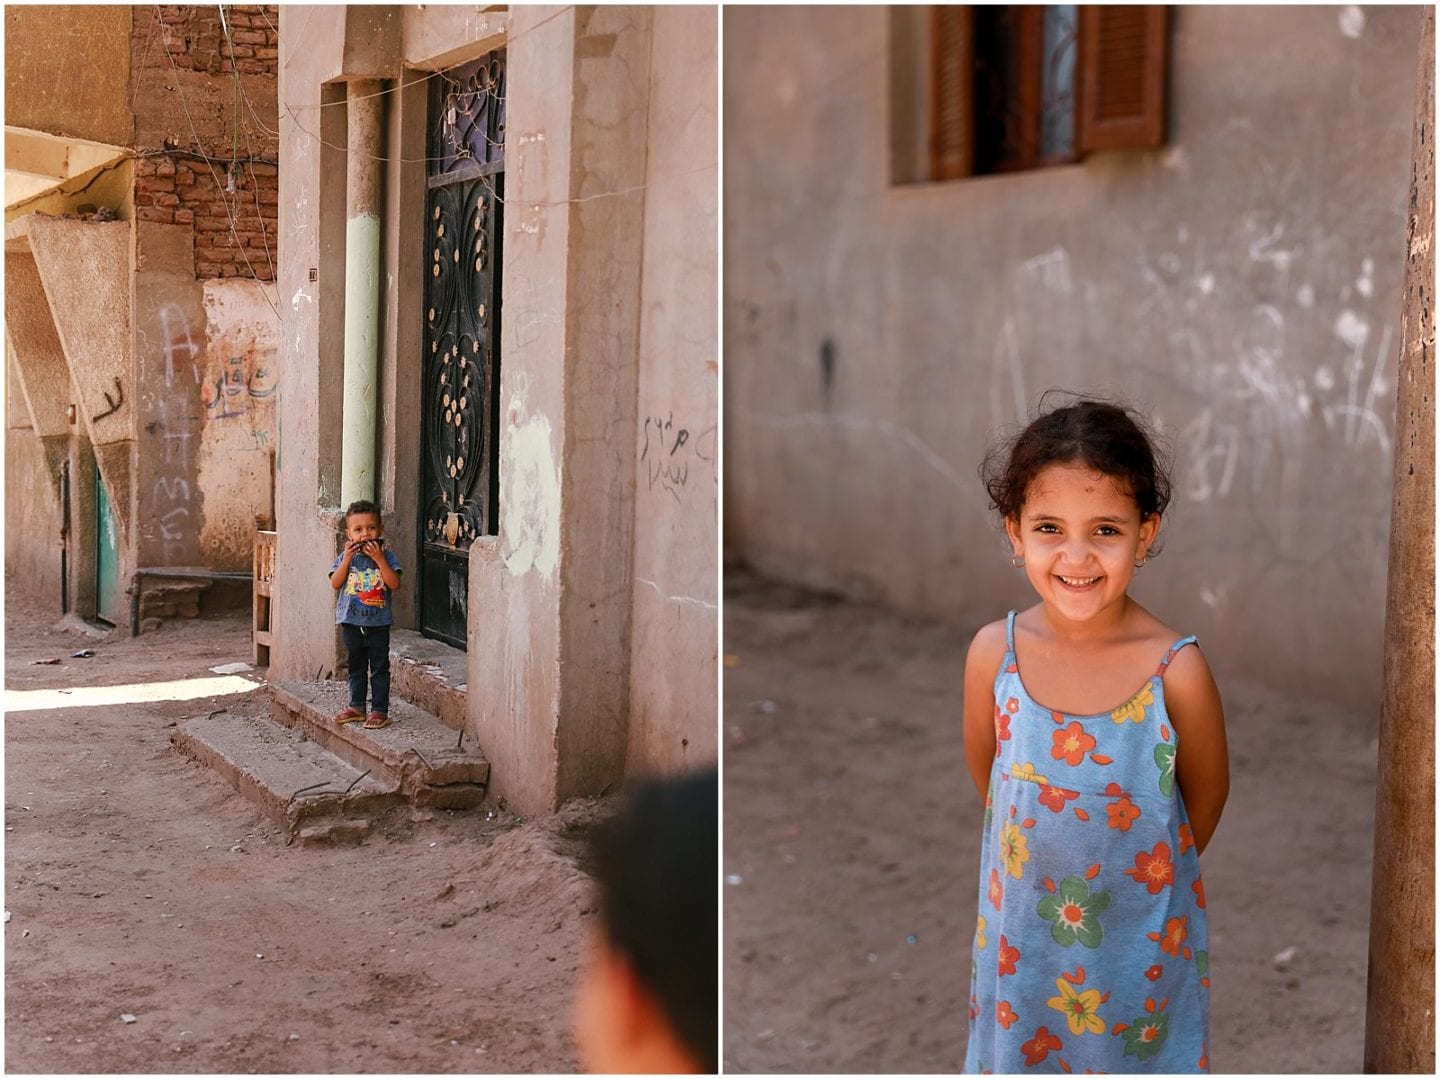 little girl and boy in small village of Egypt, photographed by Helena Woods